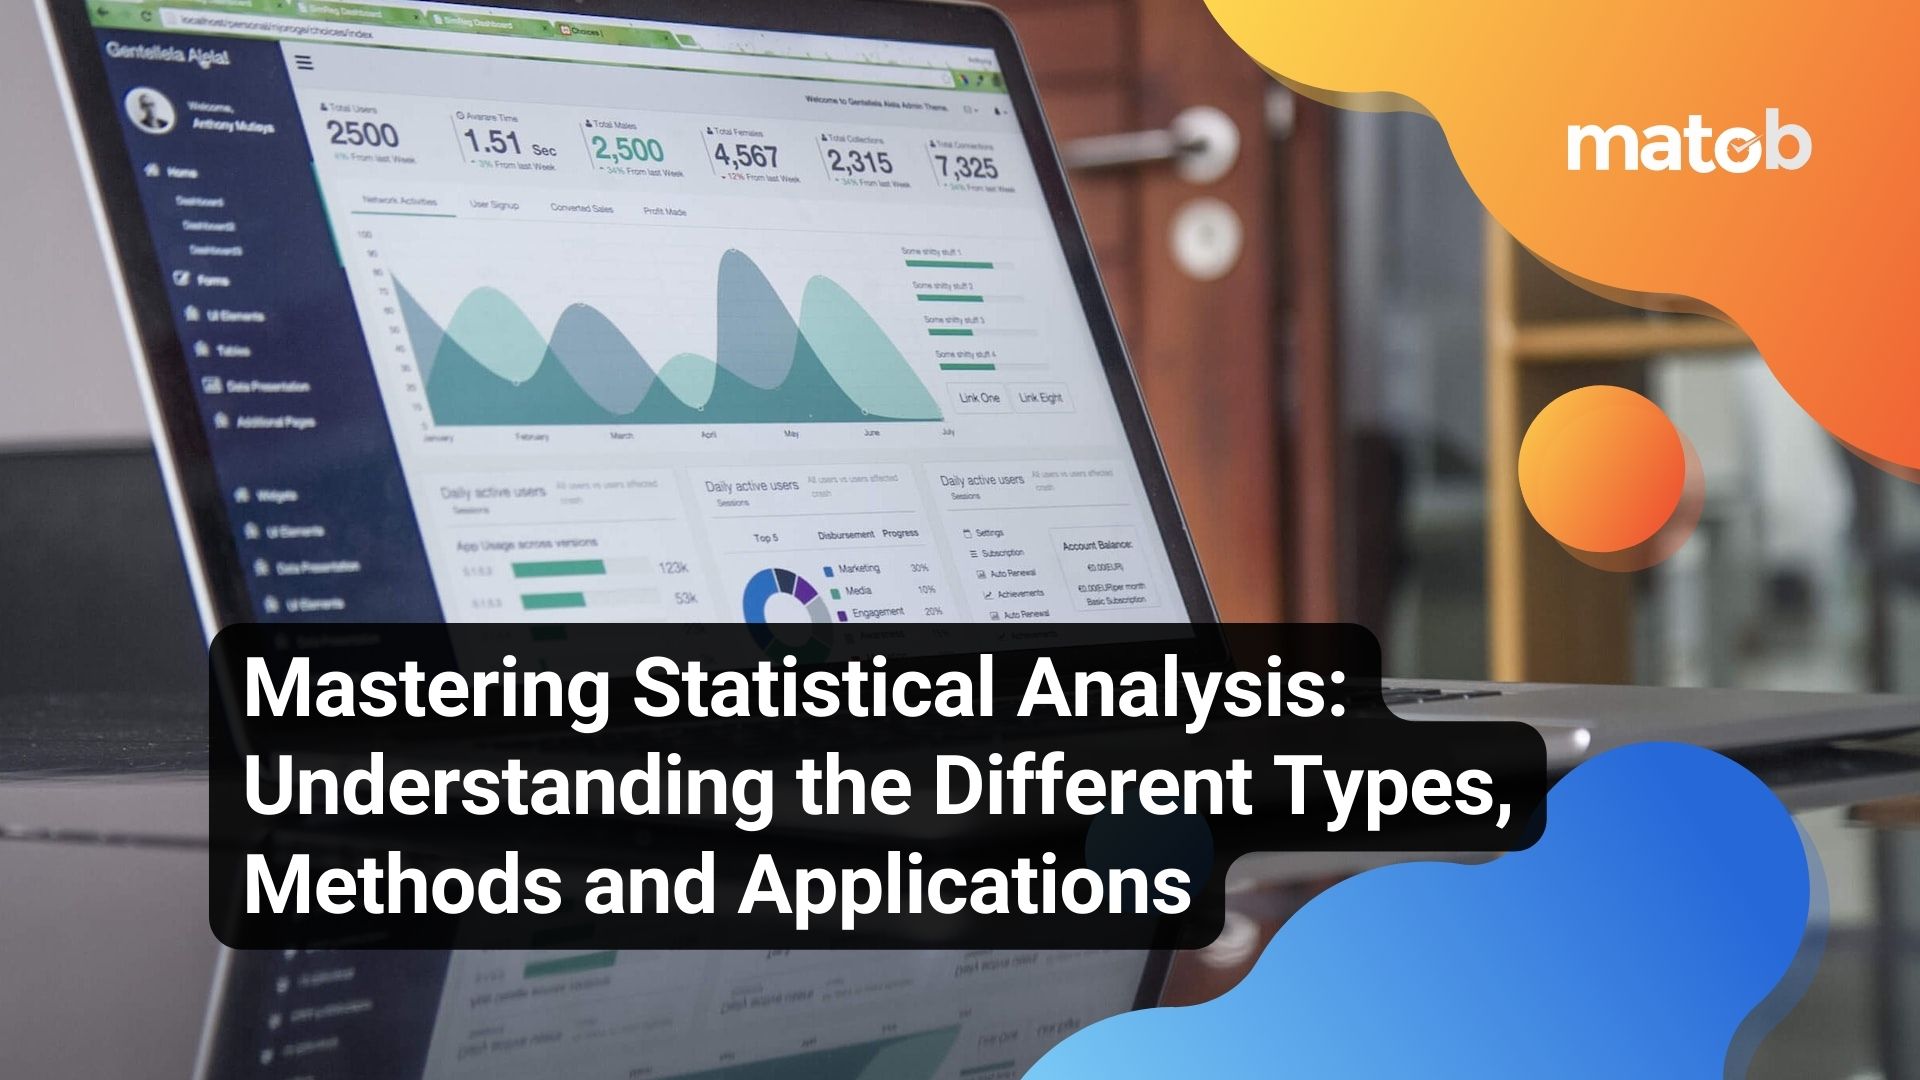 Mastering Statistical Analysis: Understanding the Different Types, Methods and Applications